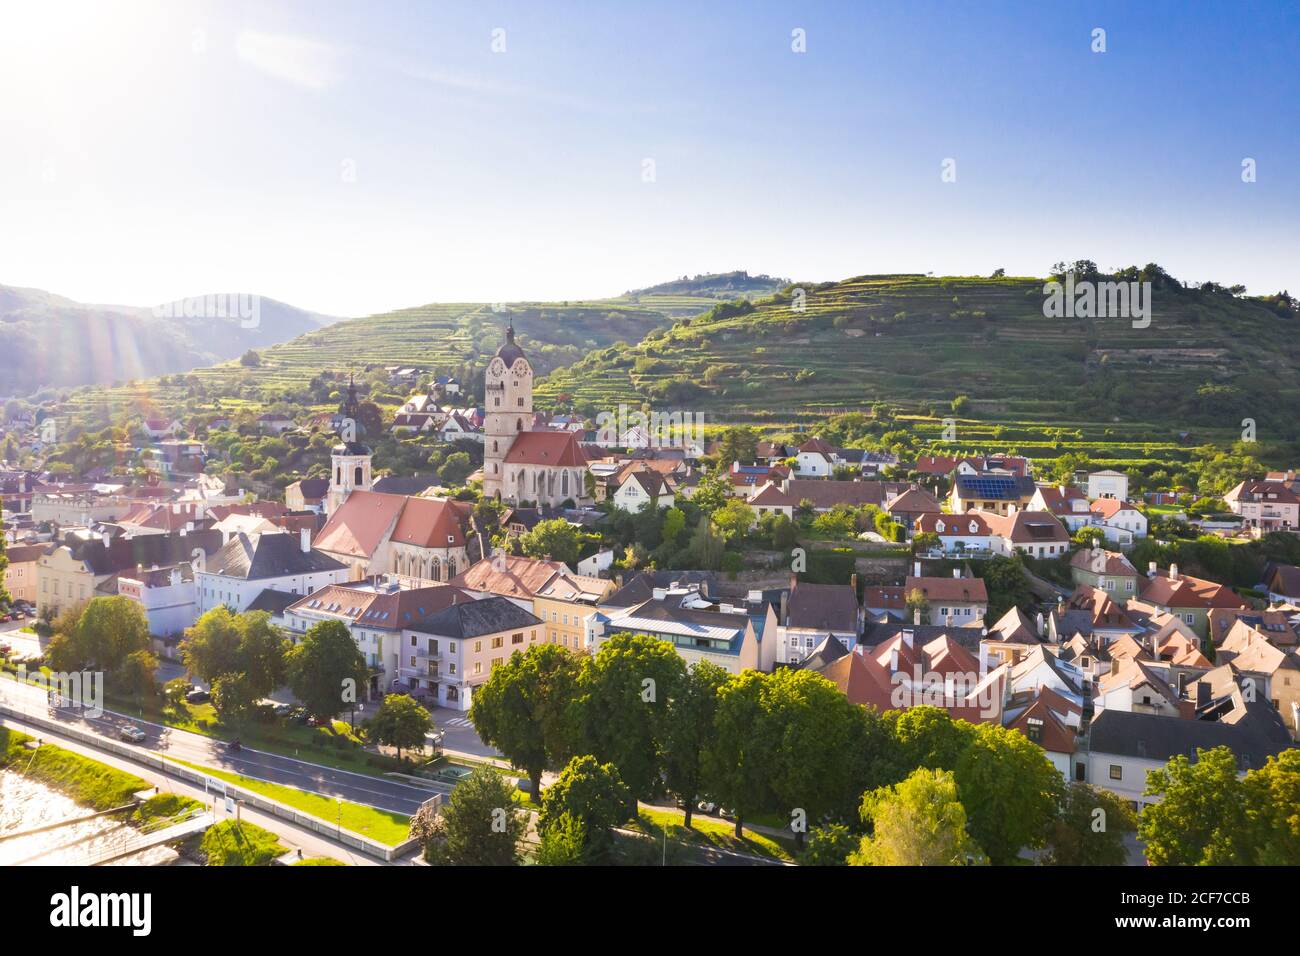 Krems and Stein downtown view. Famous old city in Lower Austria during summertime. Stock Photo